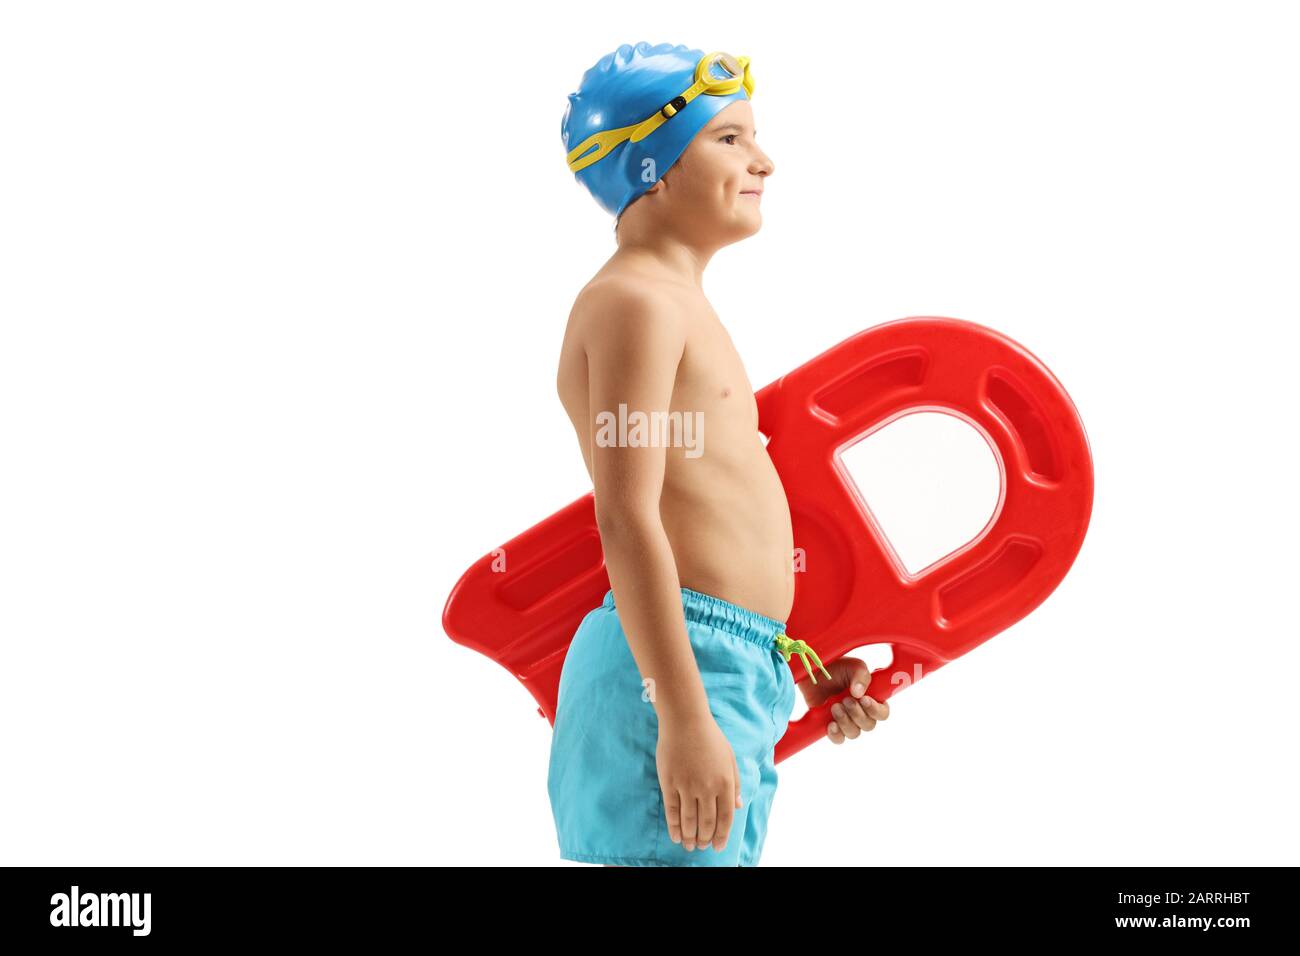 Boy in swimming trunks holding a swimming board isolated on white background Stock Photo